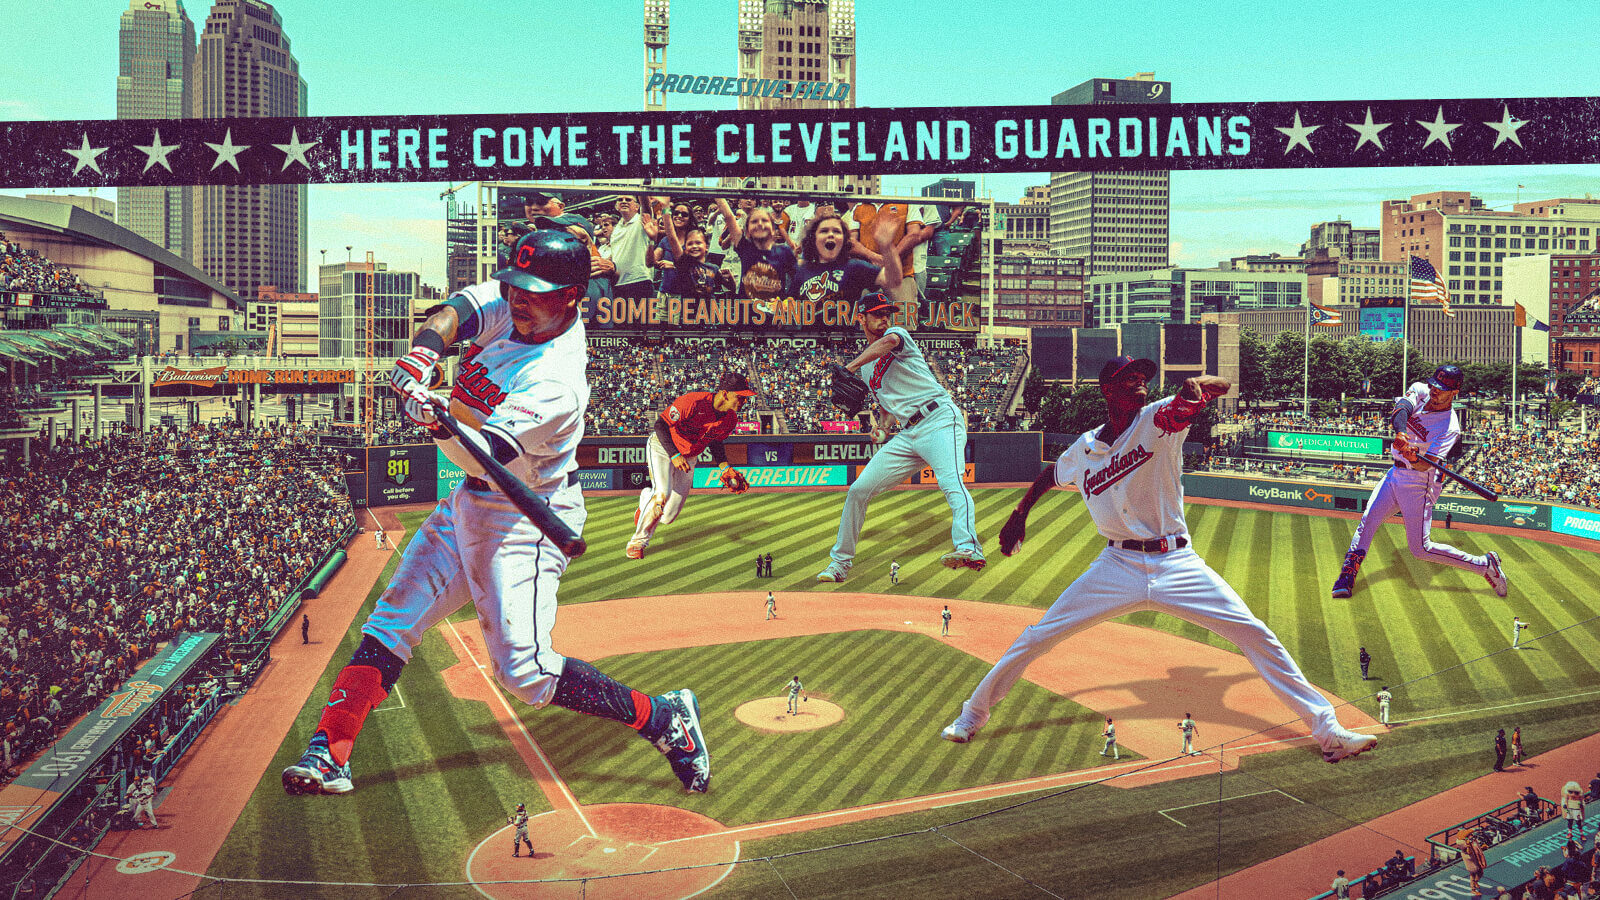 Here Come The Cleveland Guardians!